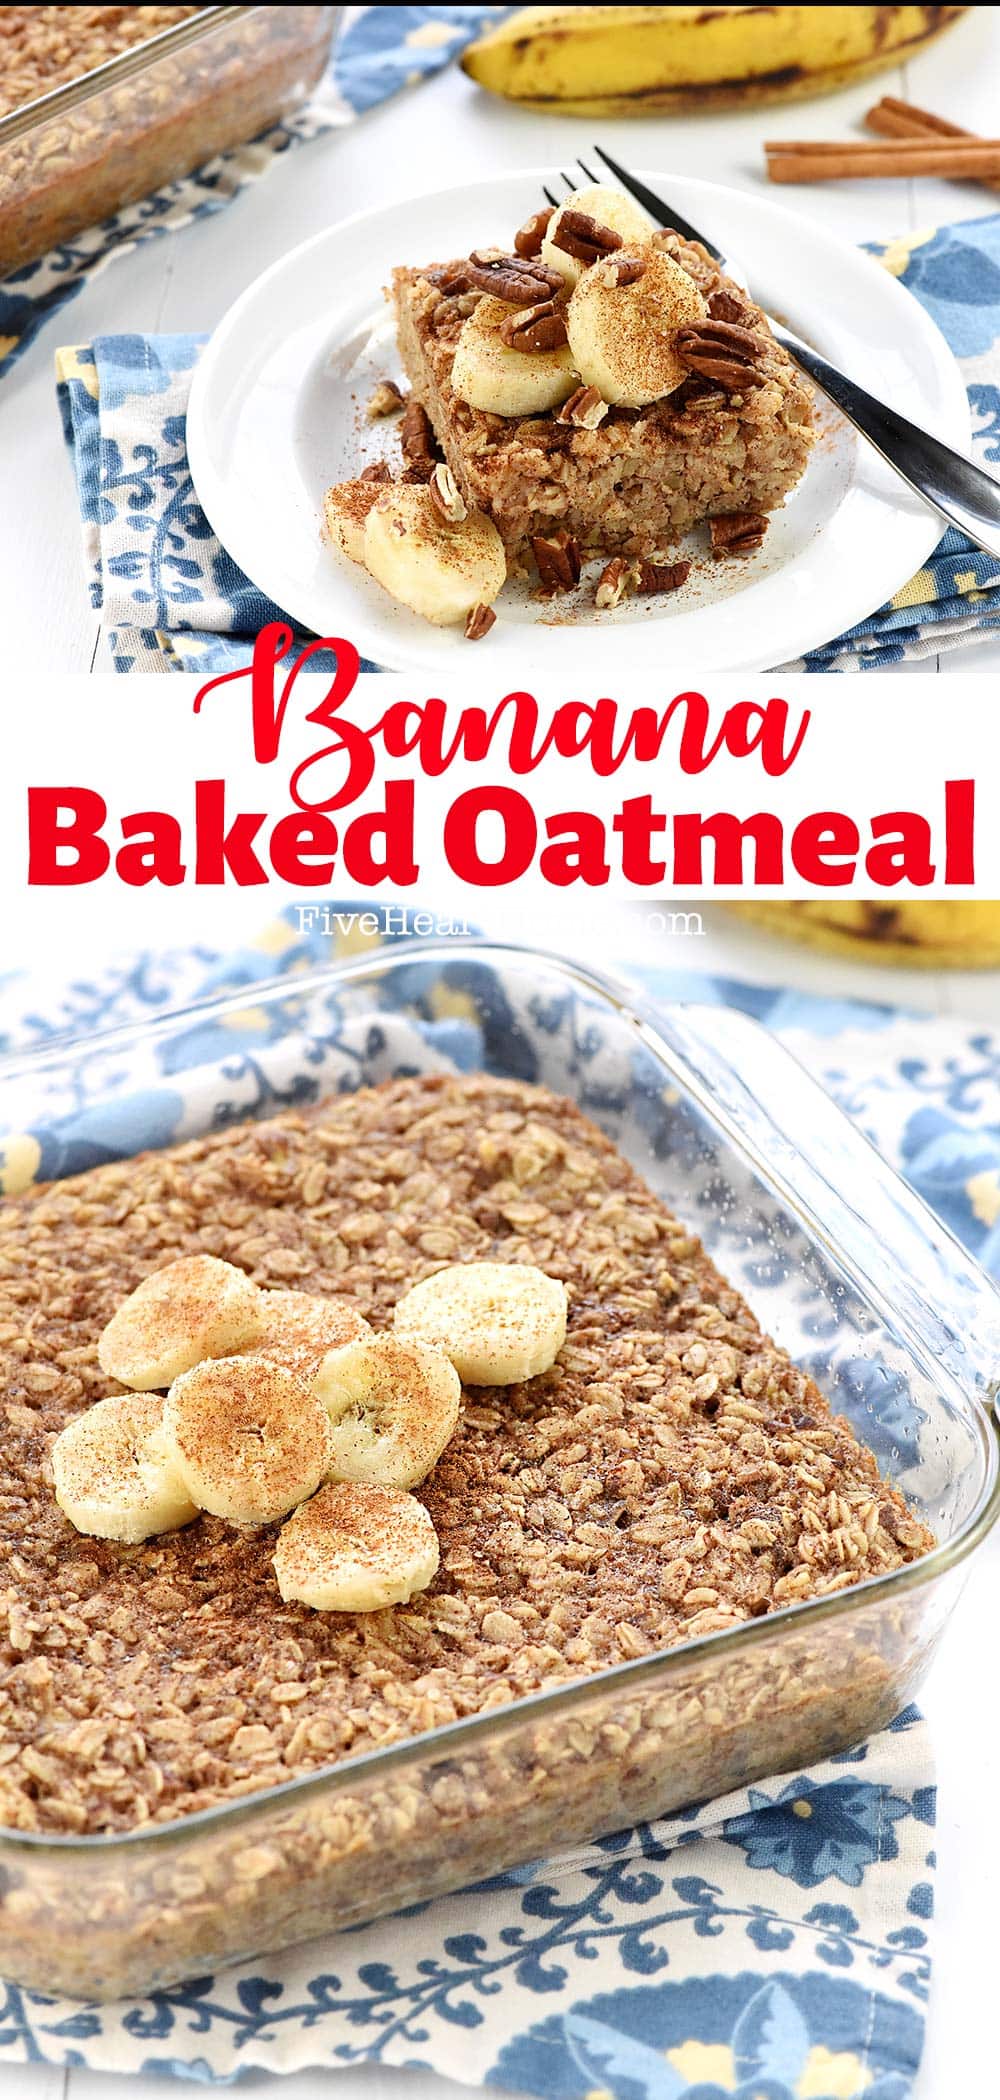 Banana Baked Oatmeal ~ boasts the delicious flavor of banana bread, but made with wholesome oats, pecans, and coconut oil for a healthy, filling breakfast! | FiveHeartHome.com via @fivehearthome